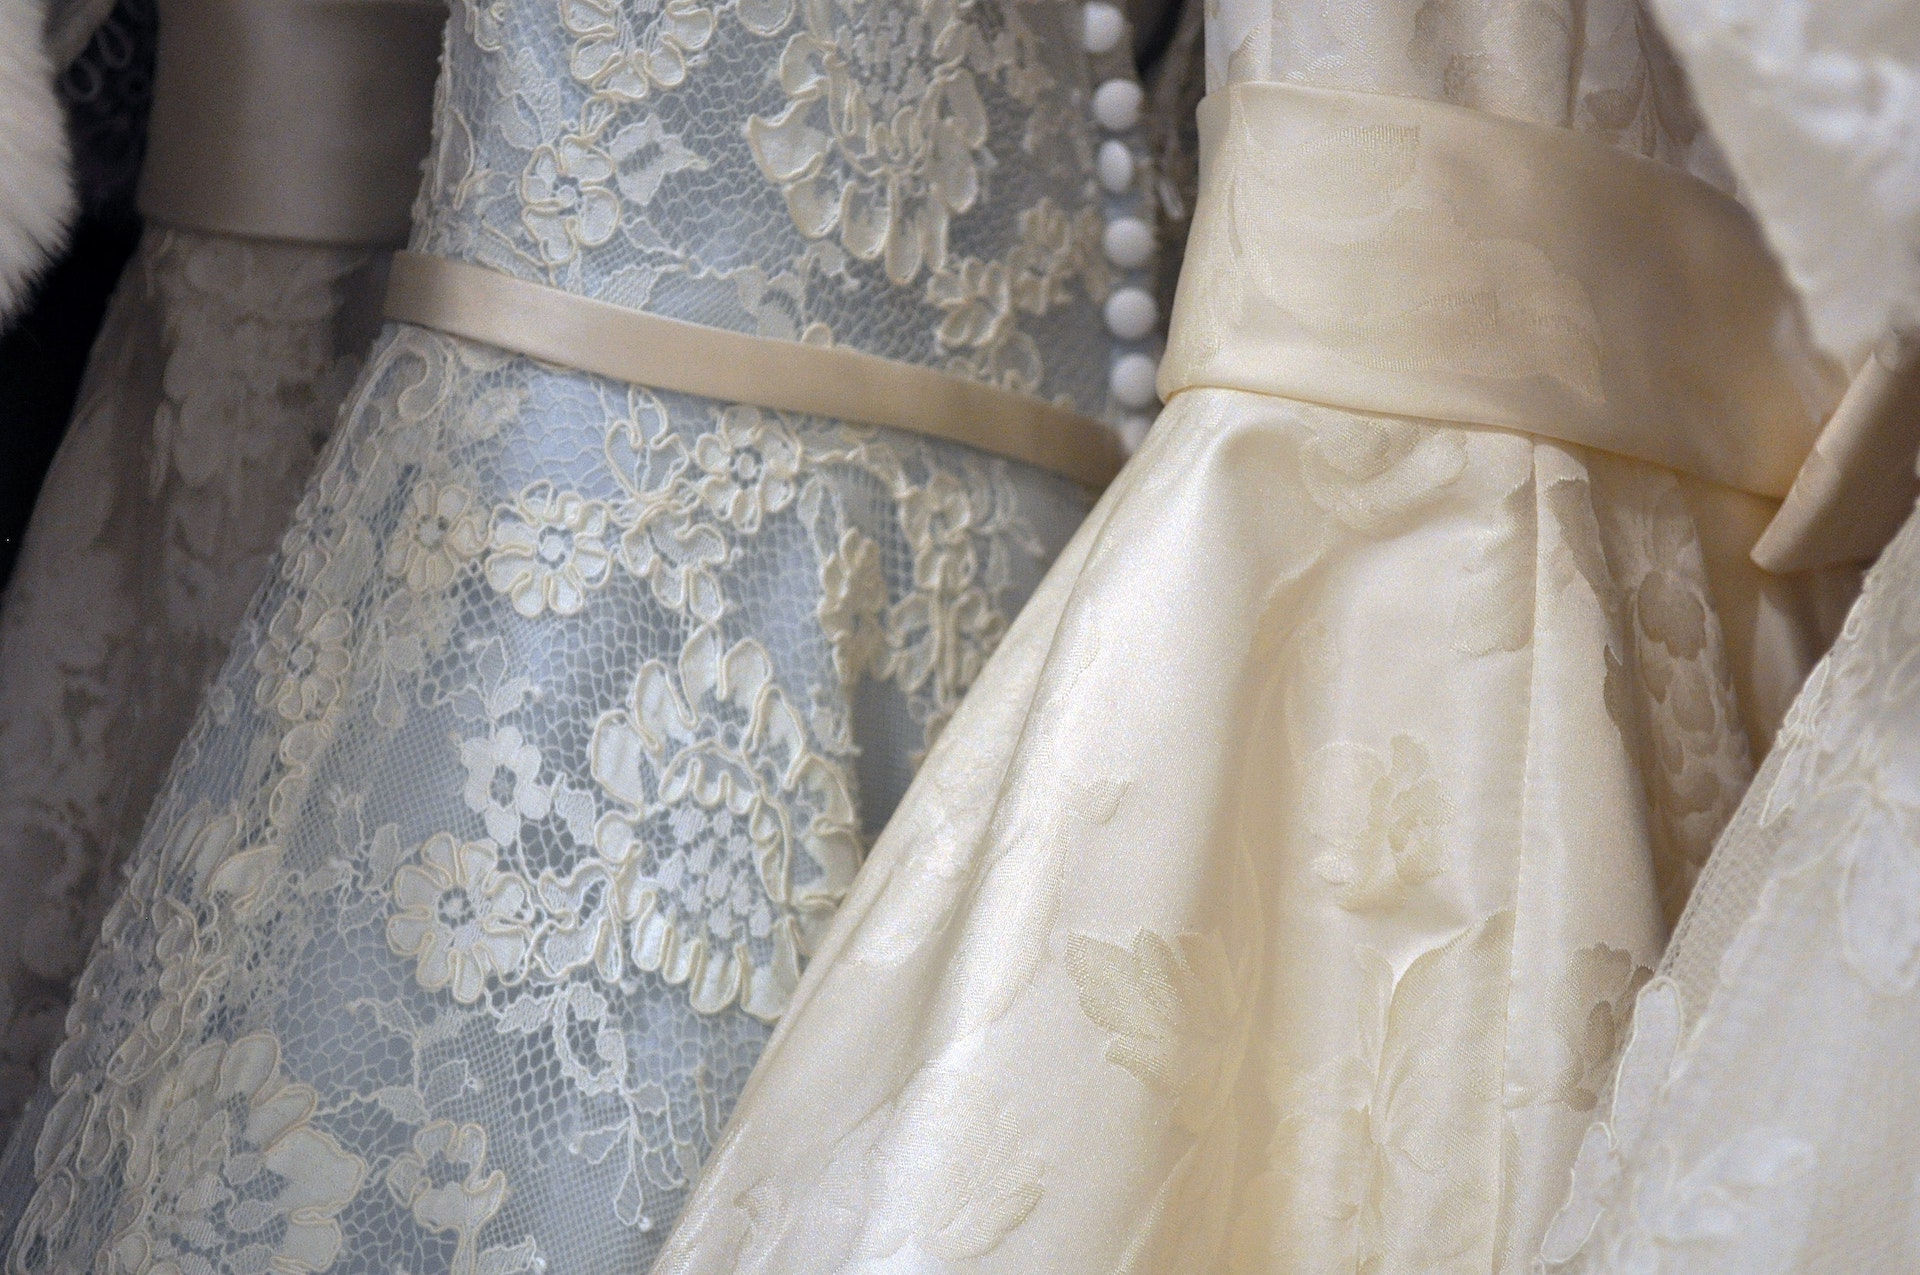 How to Buy a Vintage Wedding Dress